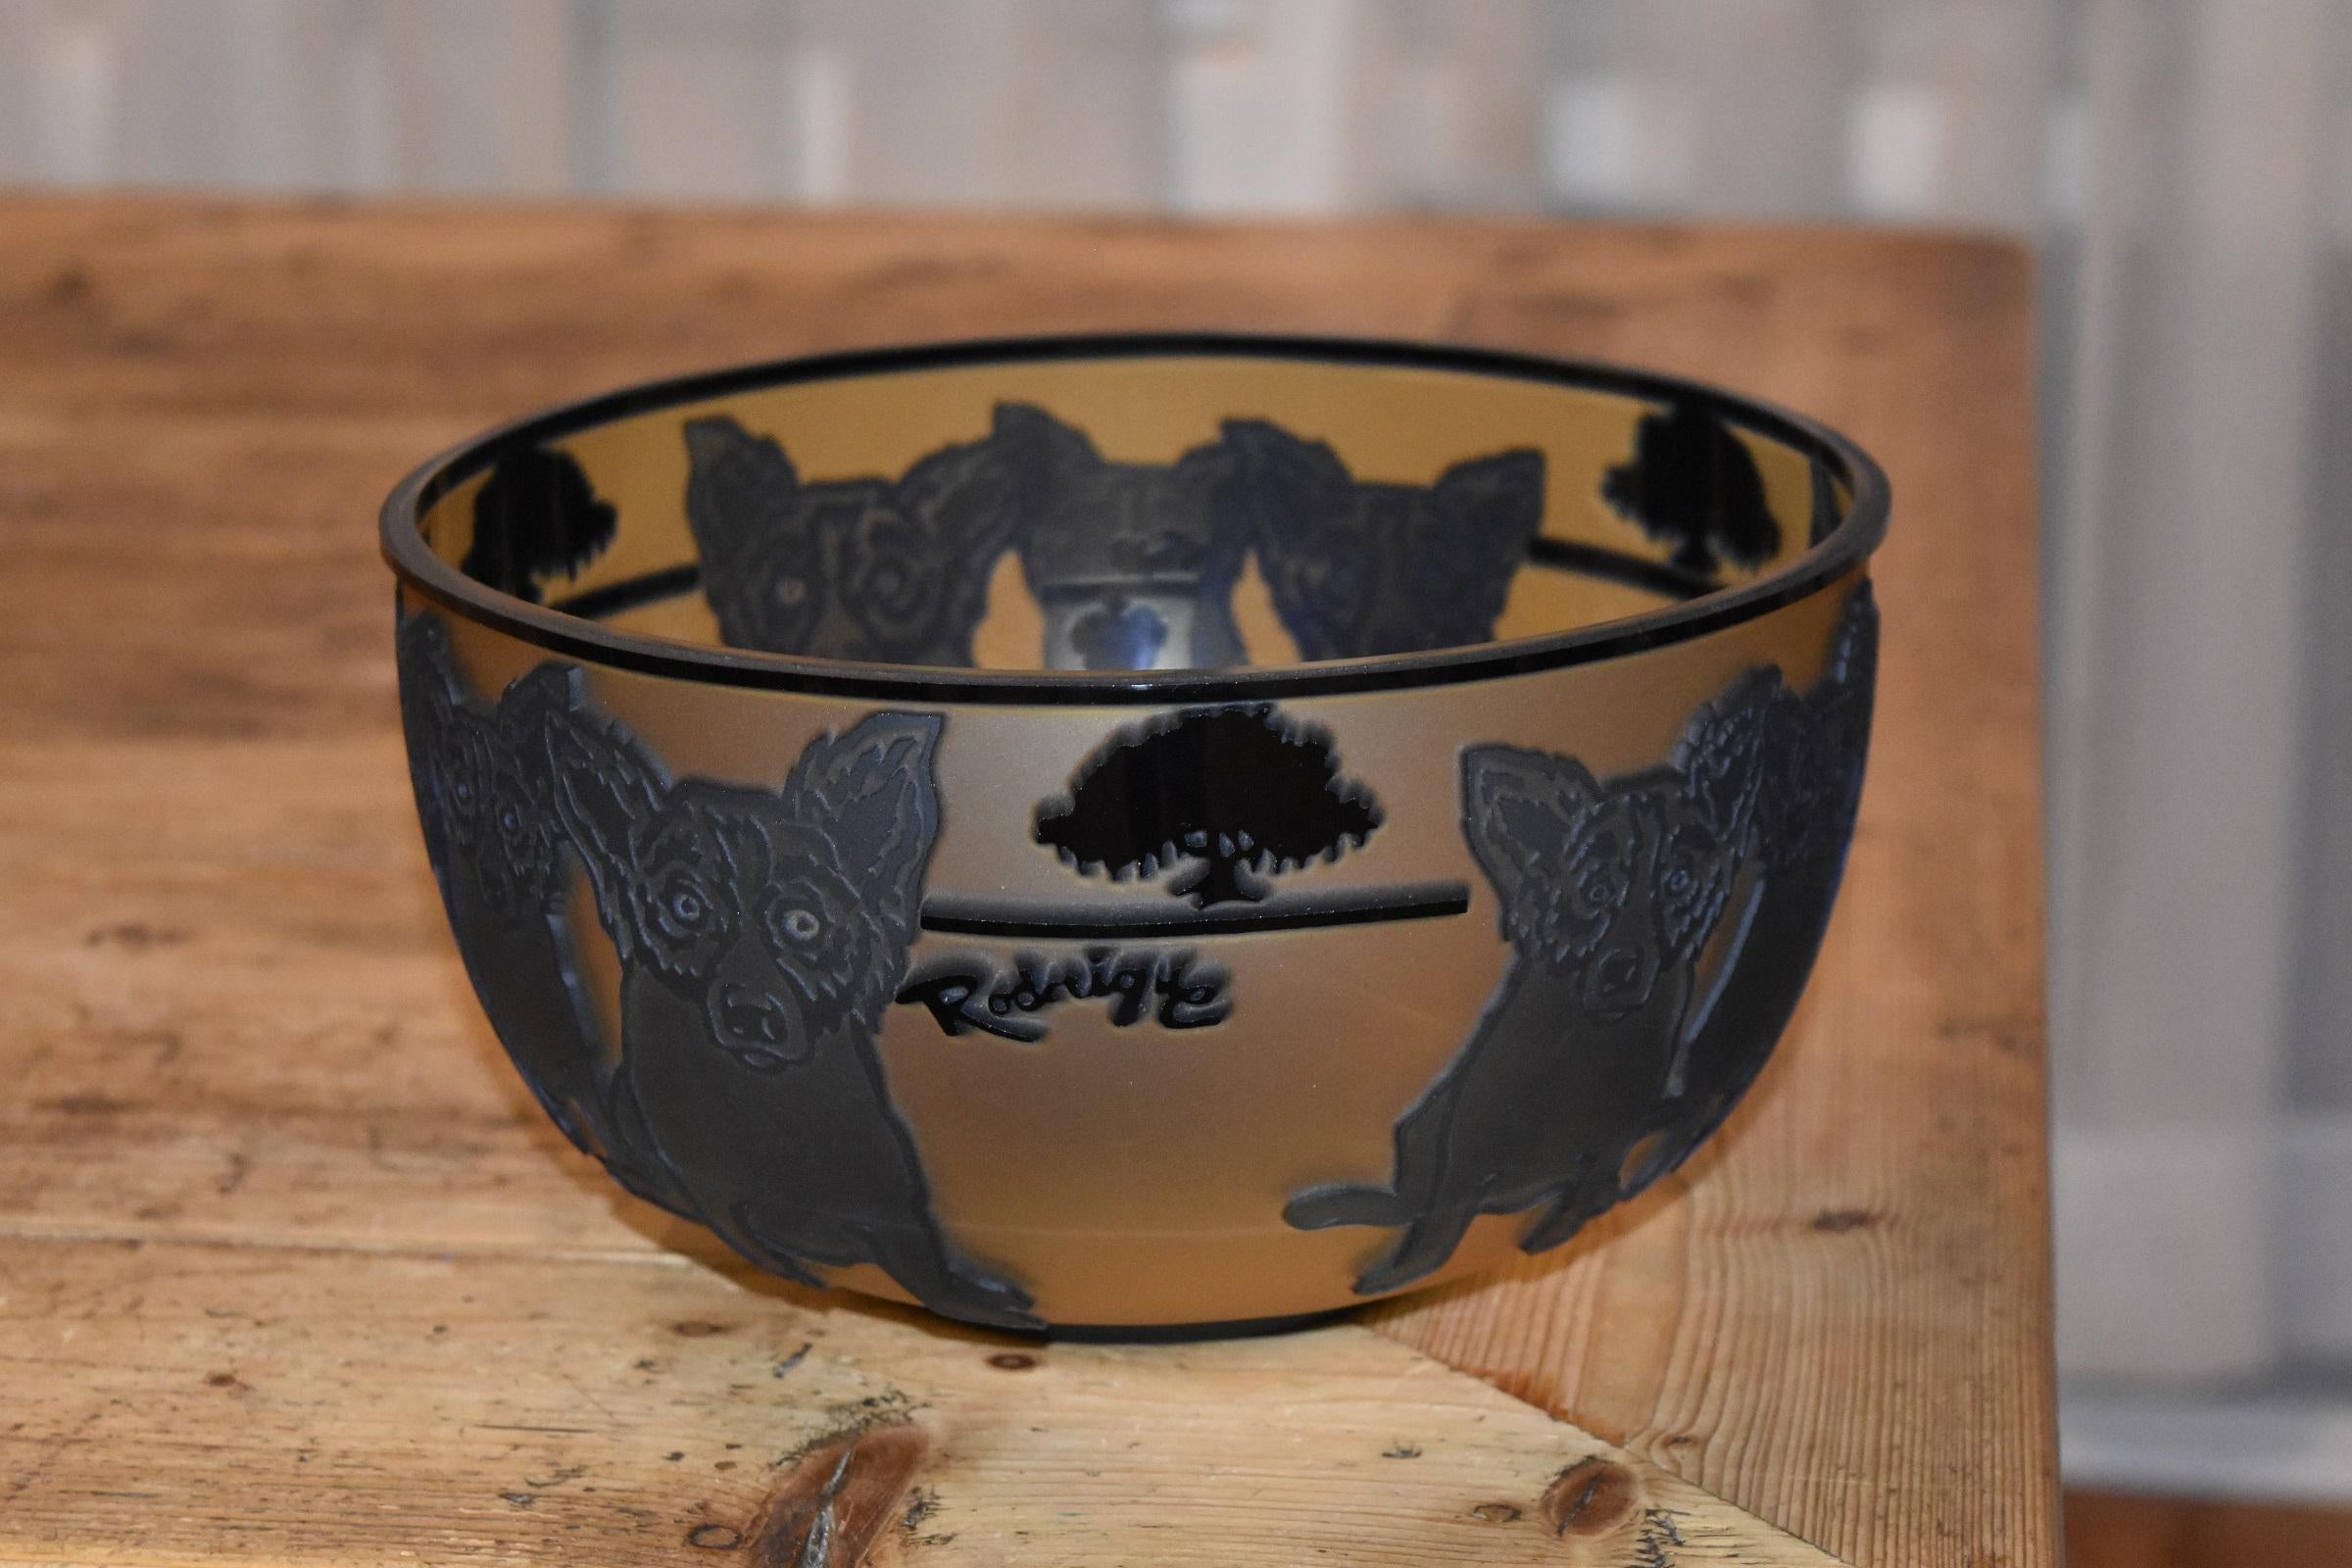 Blue Dog Cameo Glass Decorative Bowl Rare Limited Edition "903056" - Art by George Rodrigue